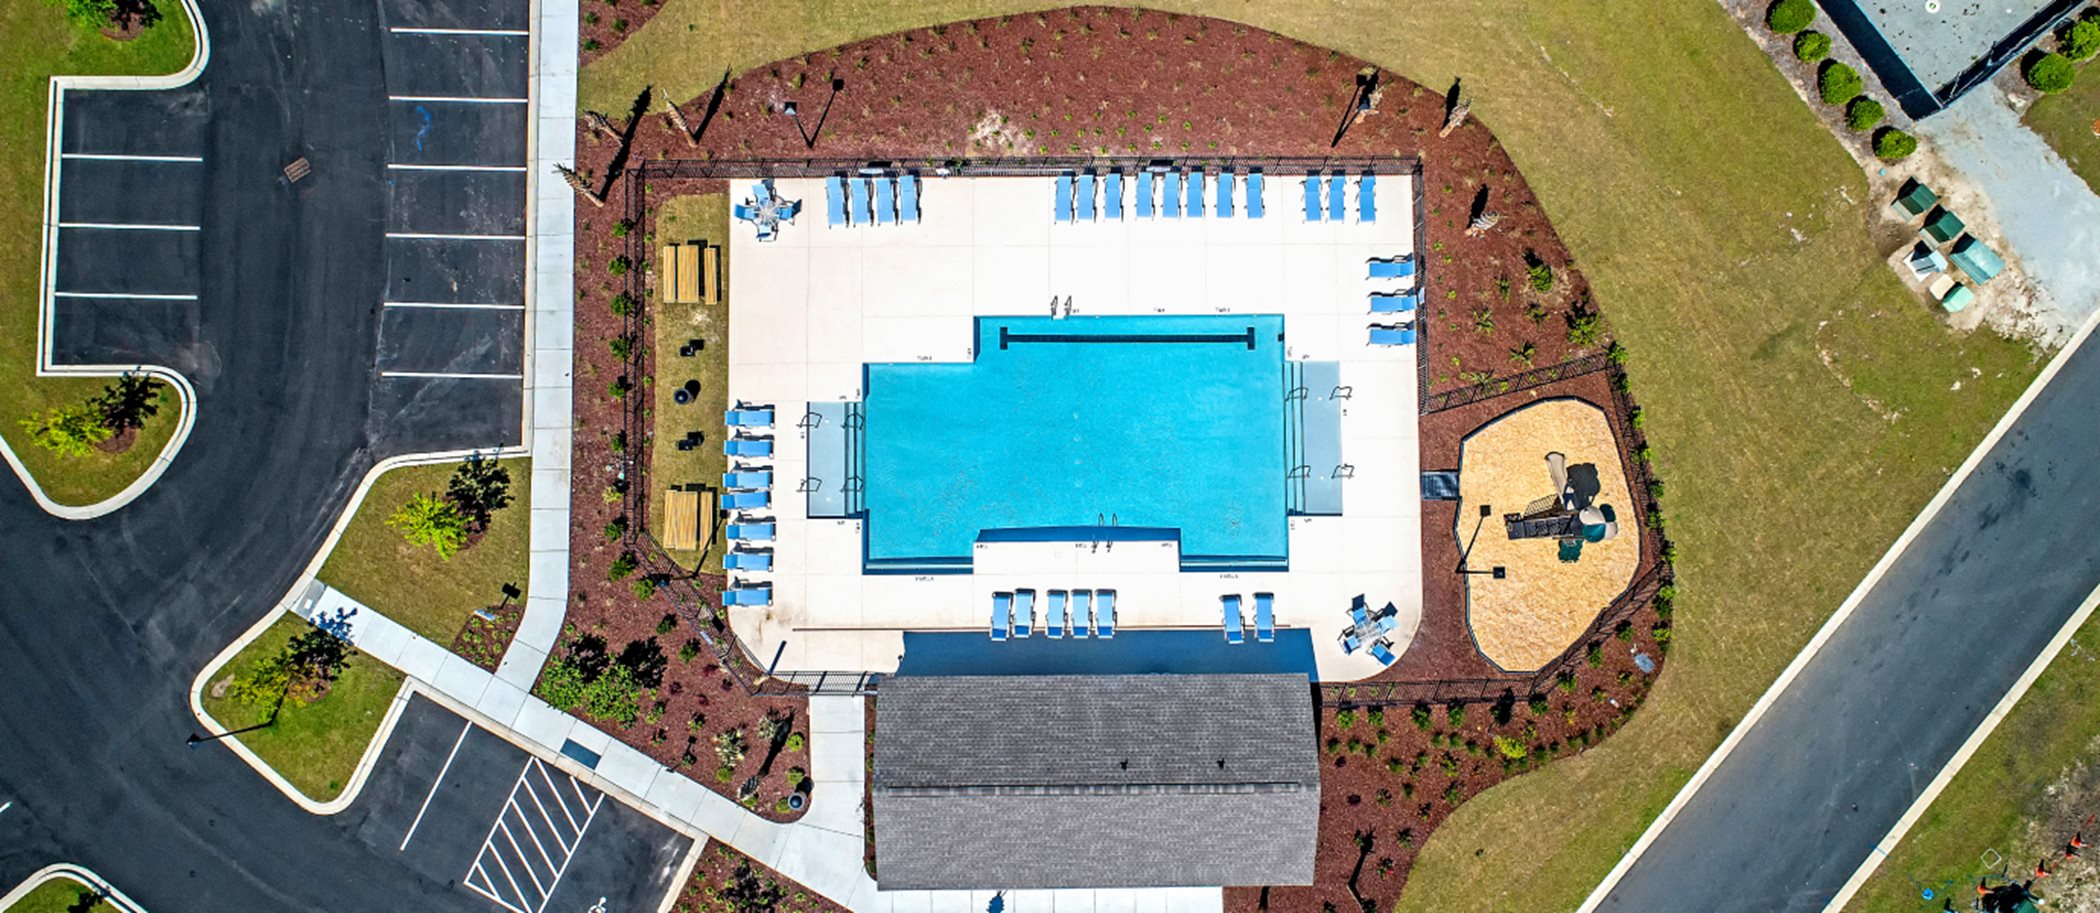 Aerial view of Forestbrook Estates swimming pool